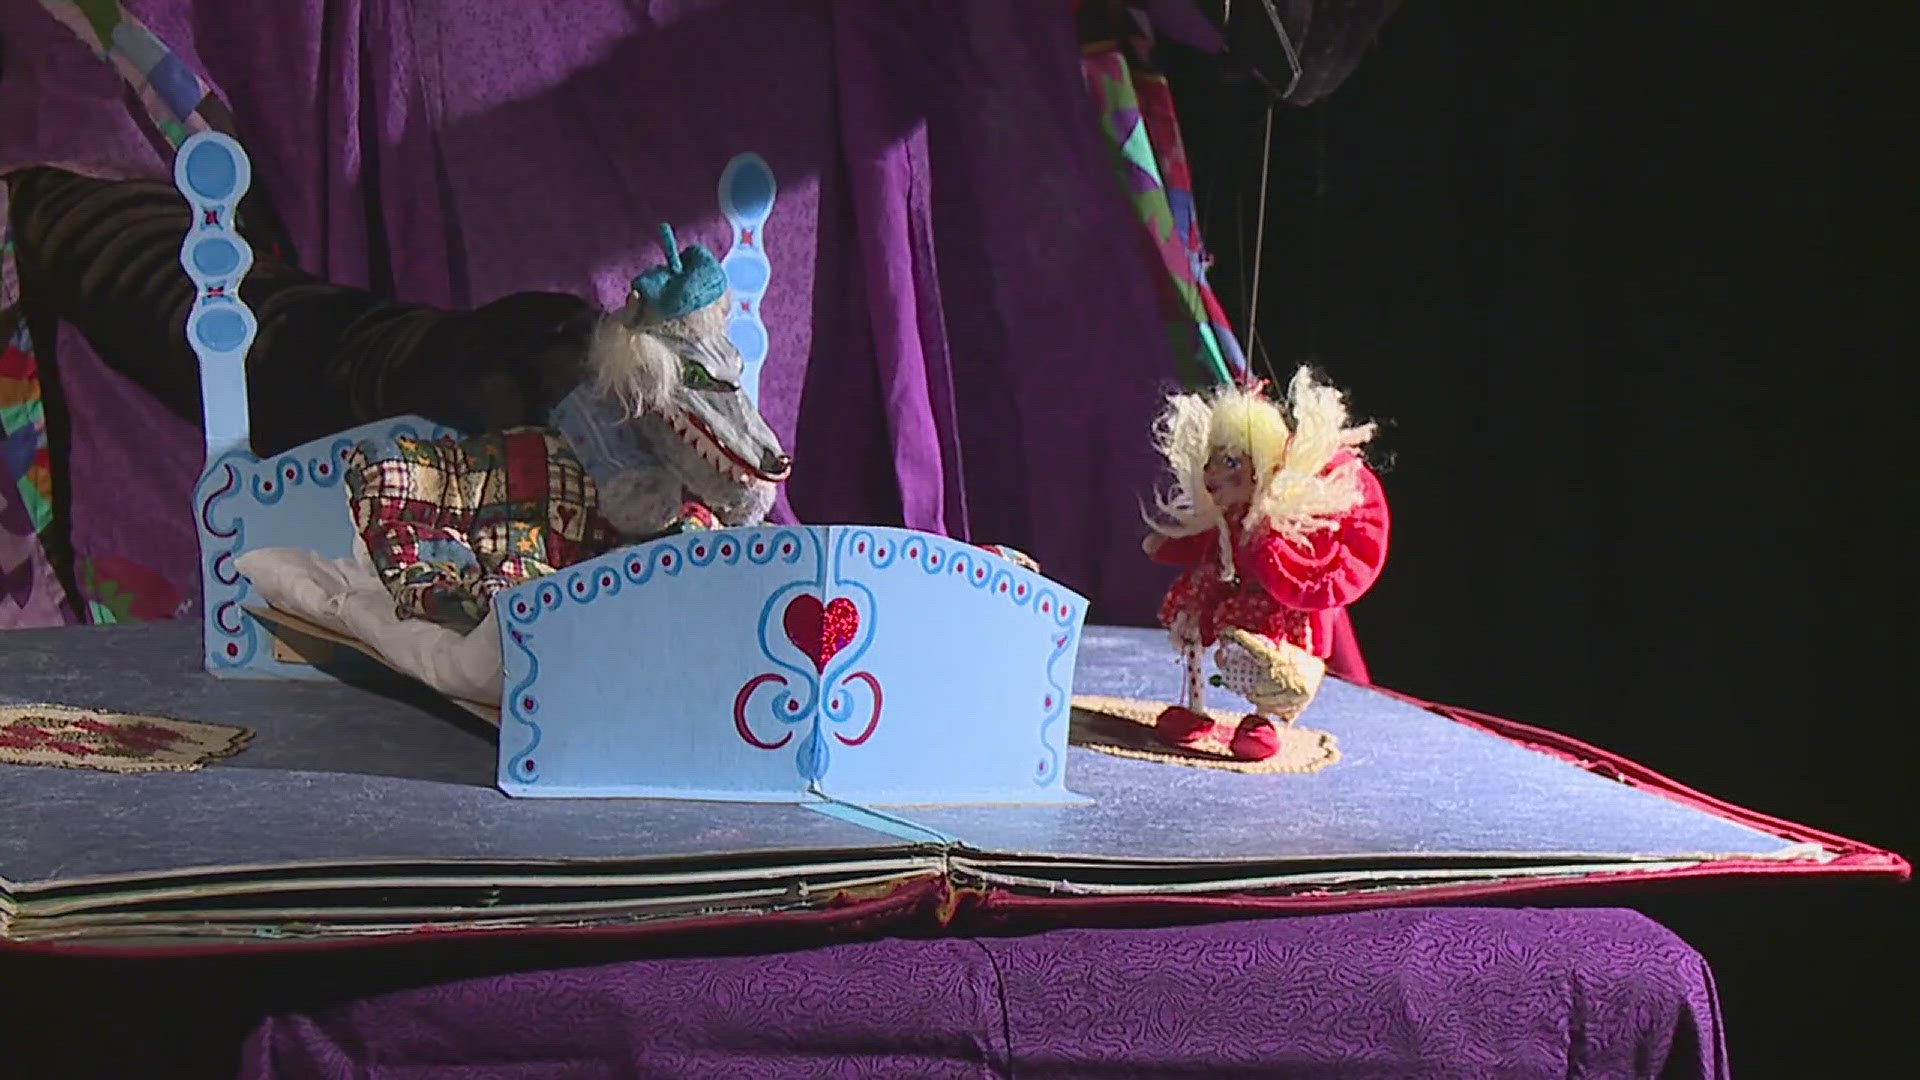 The Eulenspiegel Puppet Theatre will present a festival for new and inexperienced puppeteers on Saturday, May 4.